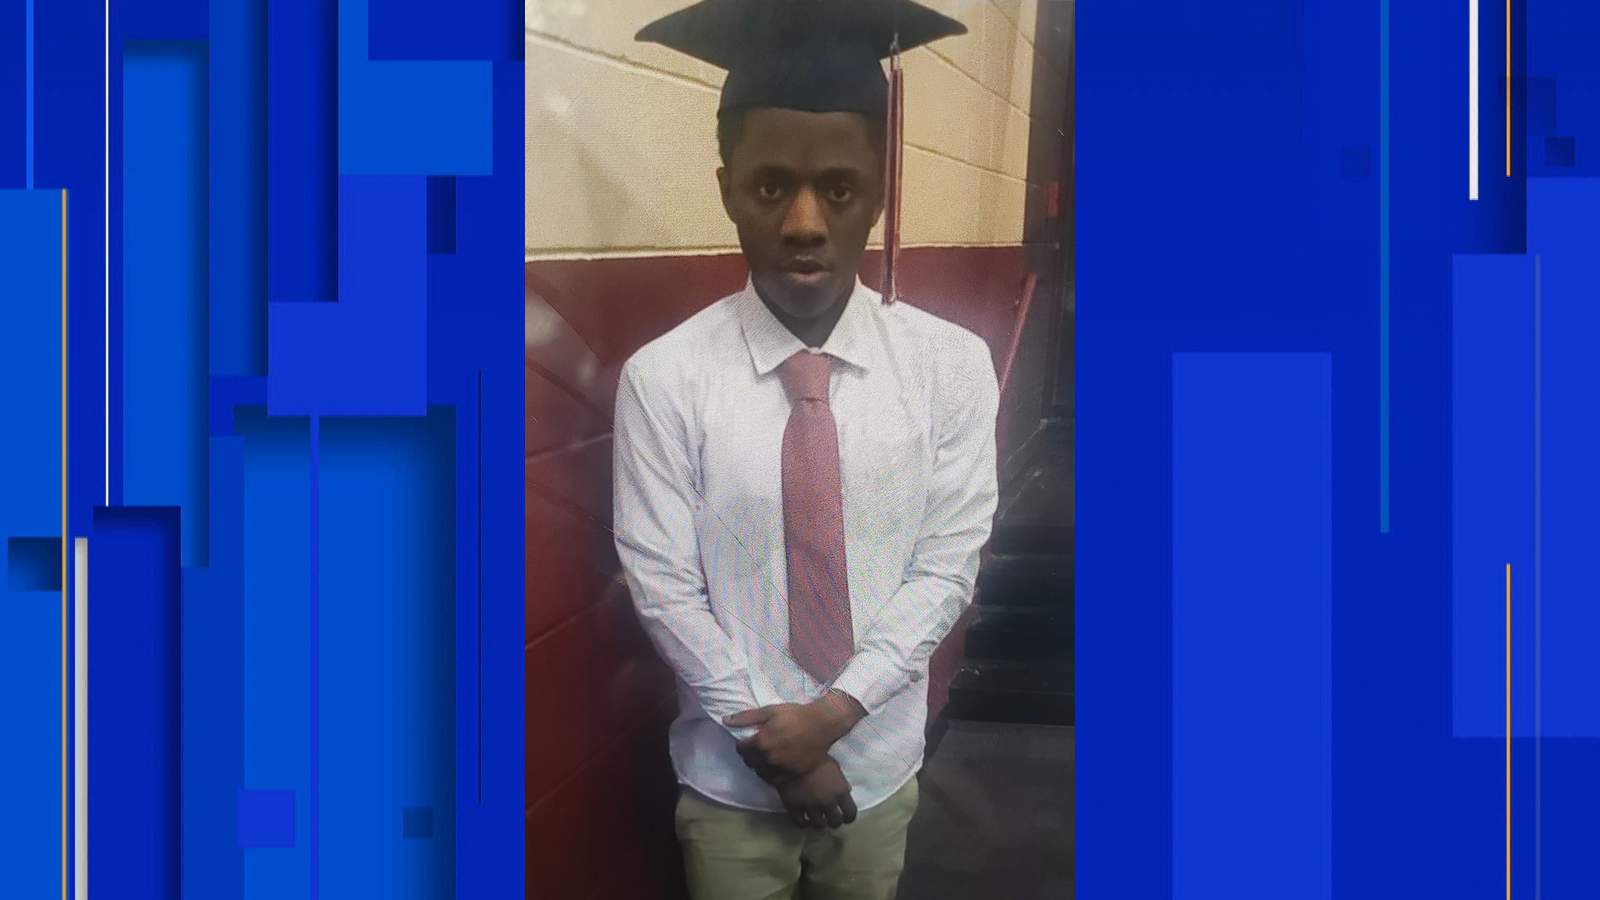 Detroit police want help finding a missing 20-year-old man